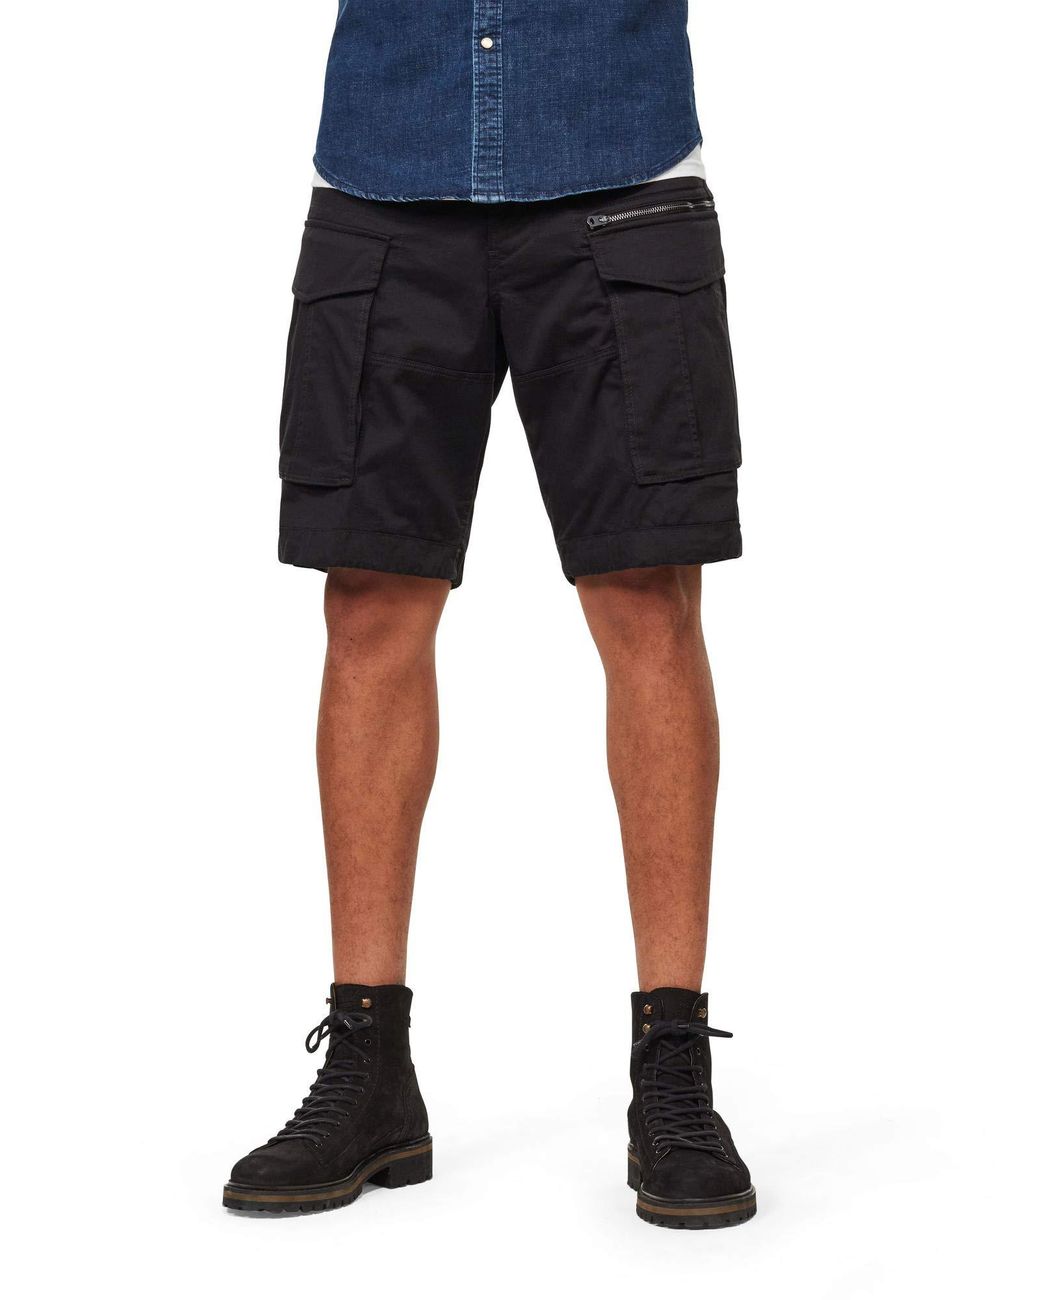 G-Star RAW Rovic Zip Loose 1/2 Shorts in Black for Men - Save 30% - Lyst